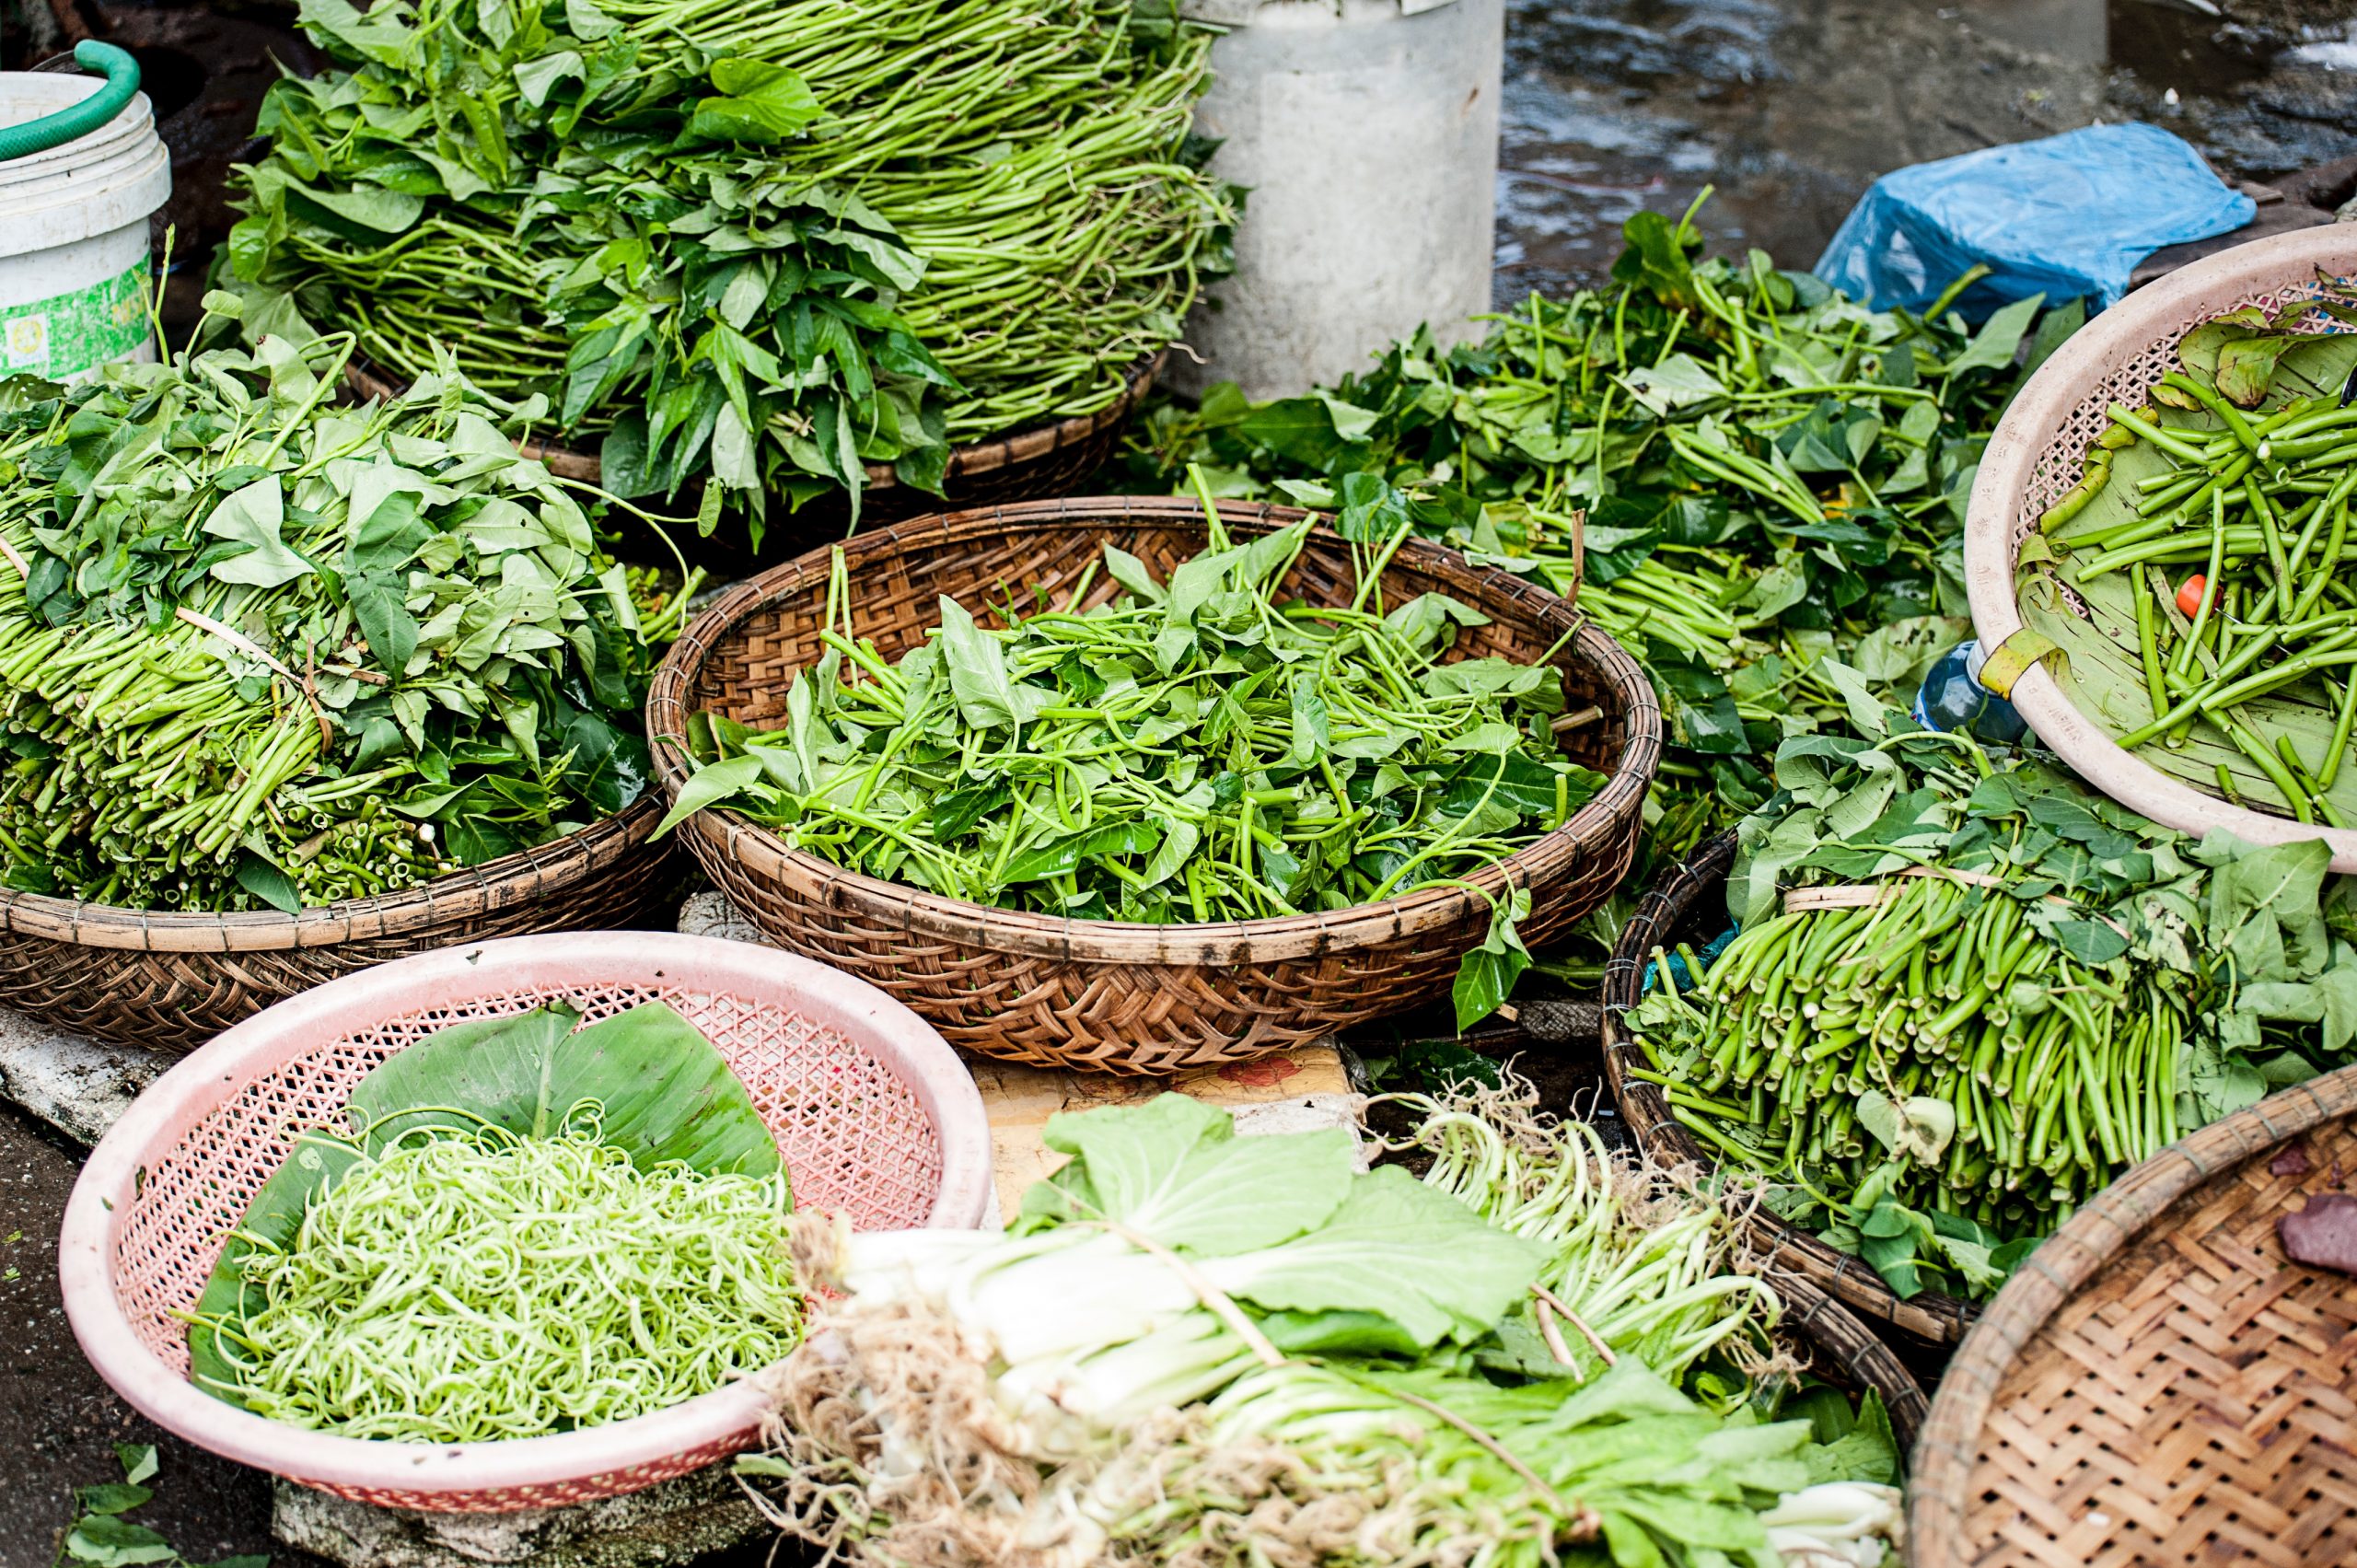 Herbs and spices in Vietnam